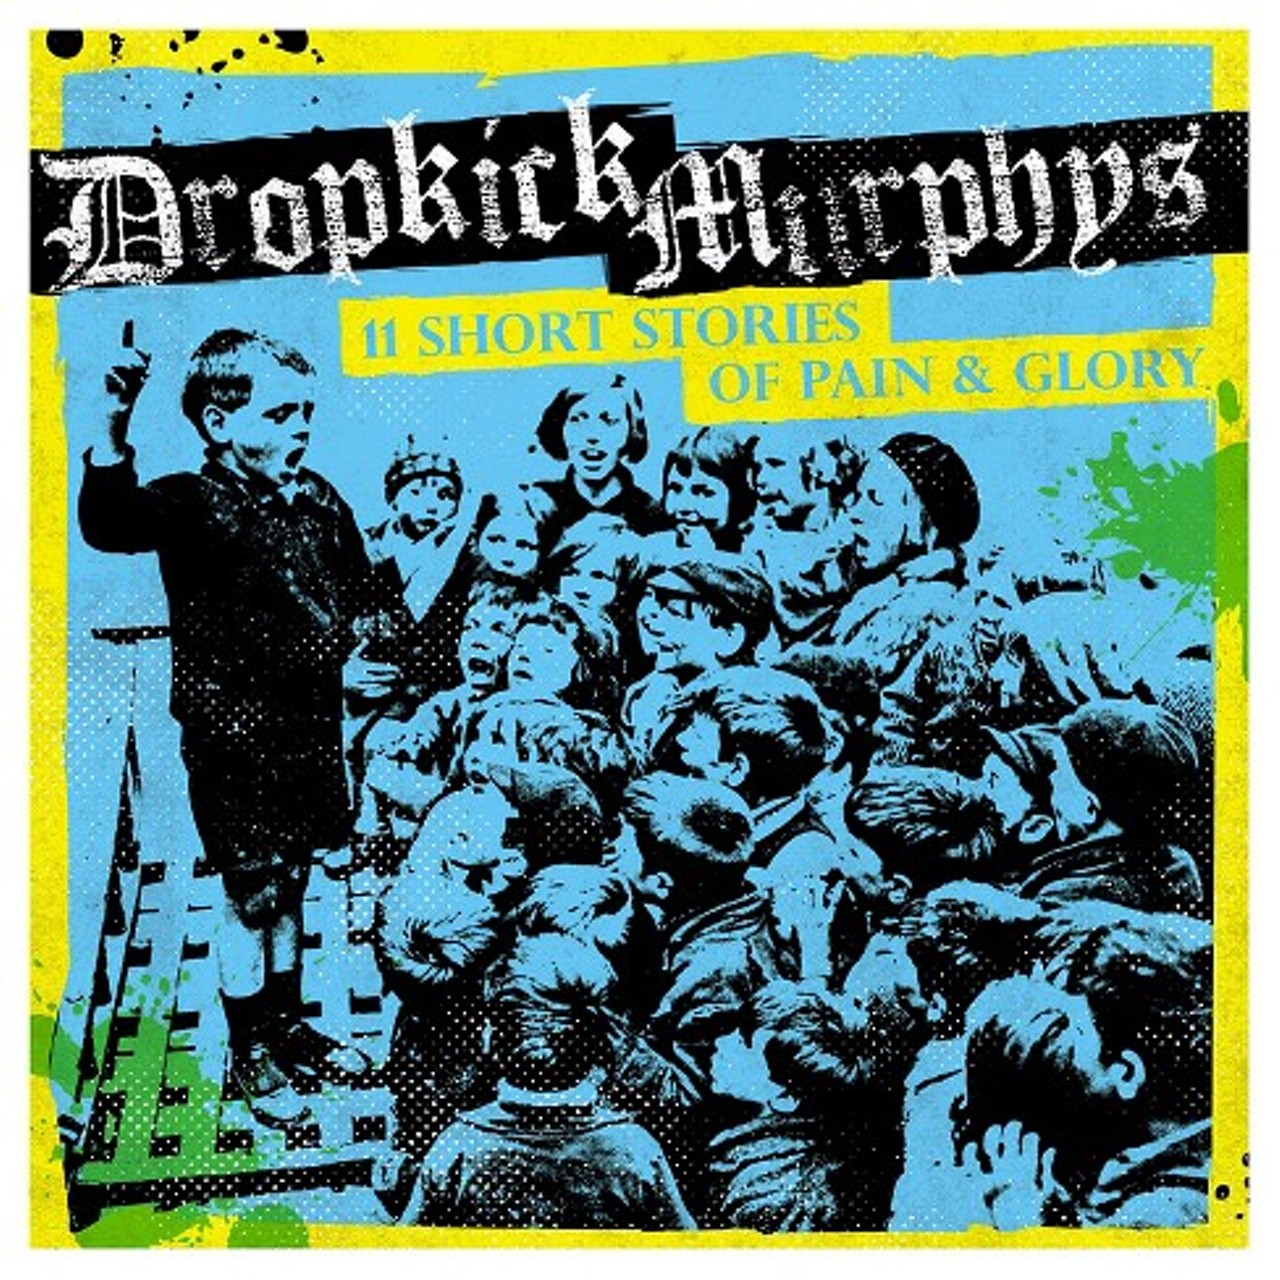 Dropkick Murphys: "11 Short Stories of Pain & Glory"
These purveyors of Celtic punk have long been associated with the city of Boston, but they actually recorded this 2017 album in San Antonio to get away from howetown distractions. In addition to the usual sing-along choruses and working-class wisecracks, the album is distinguished by the song “4-5-13,” which pays tribute to those lost in the Boston Marathon bombing.
Photo via Dropkick Murphys